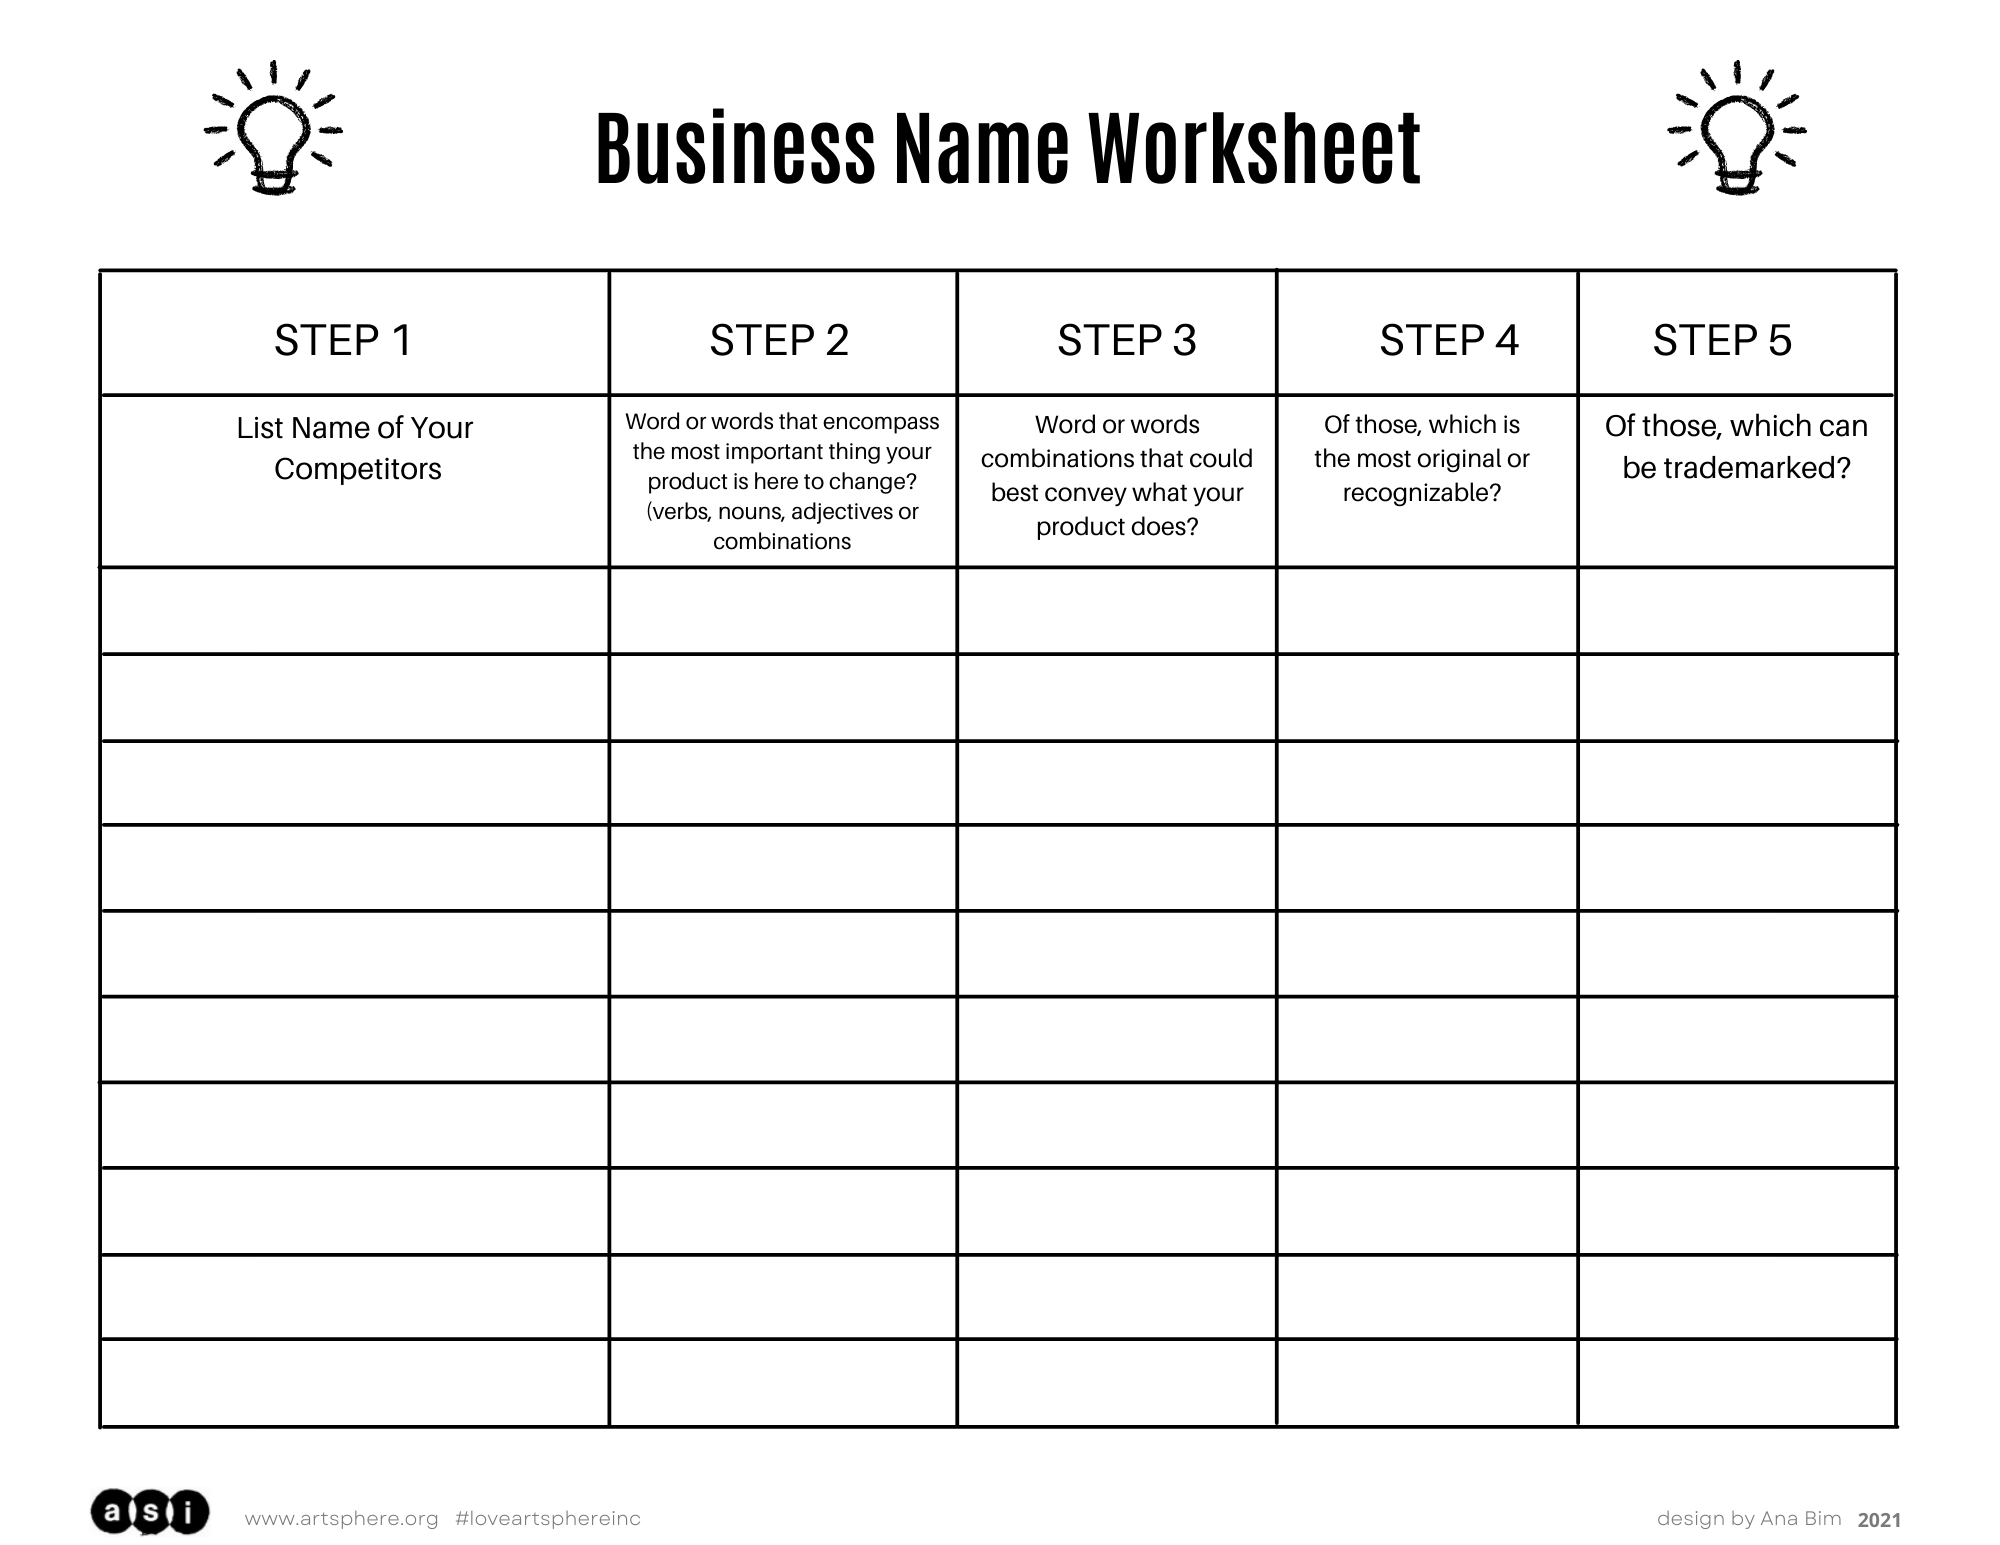 Brainstorm the Perfect Business Name - Cheat Sheet Download